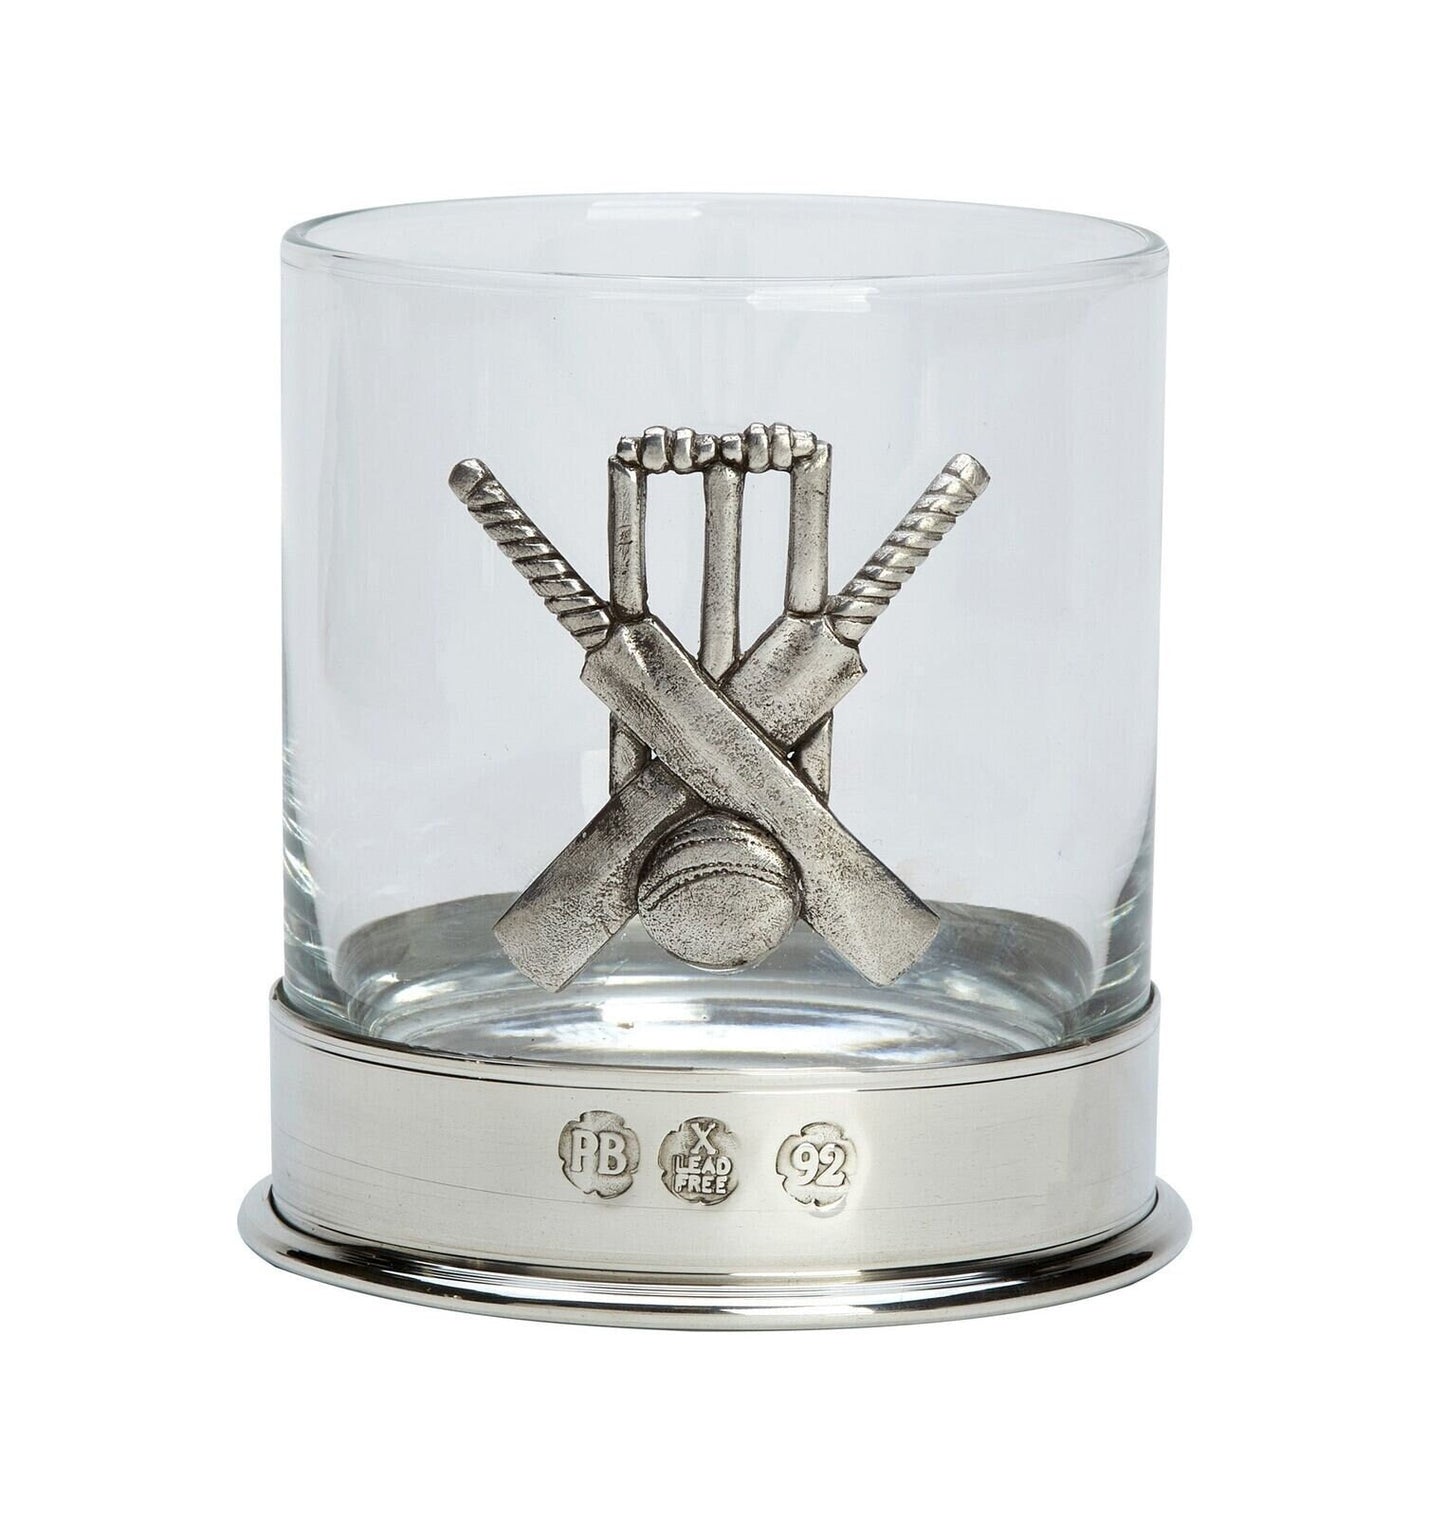 Pewterware mounted whisky glass with a cricket set emblem